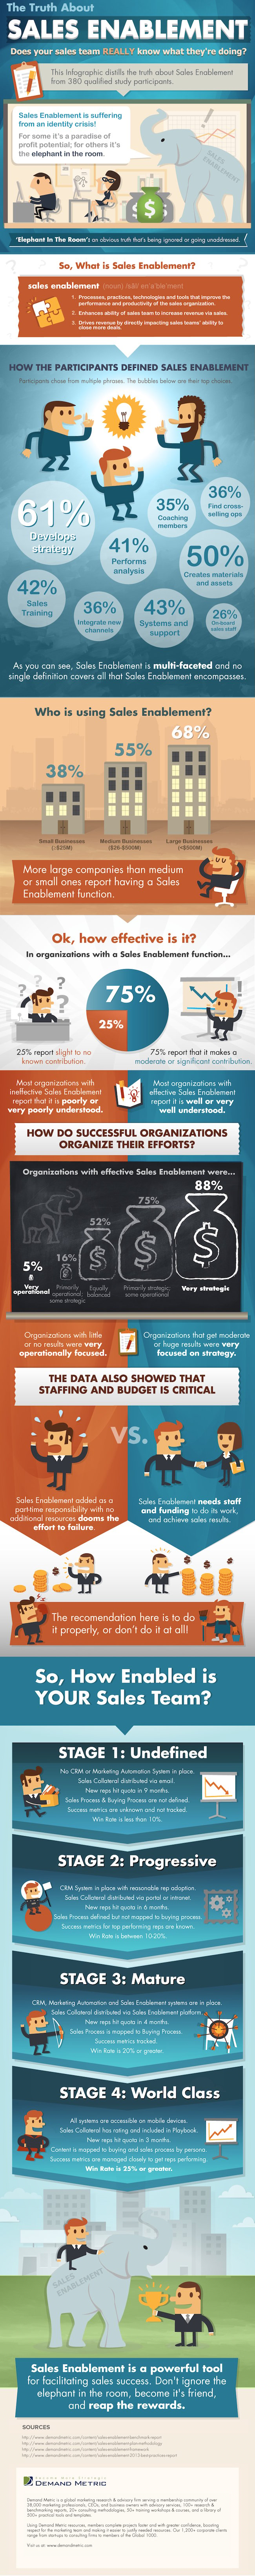 Sales-Enablement-Infographic